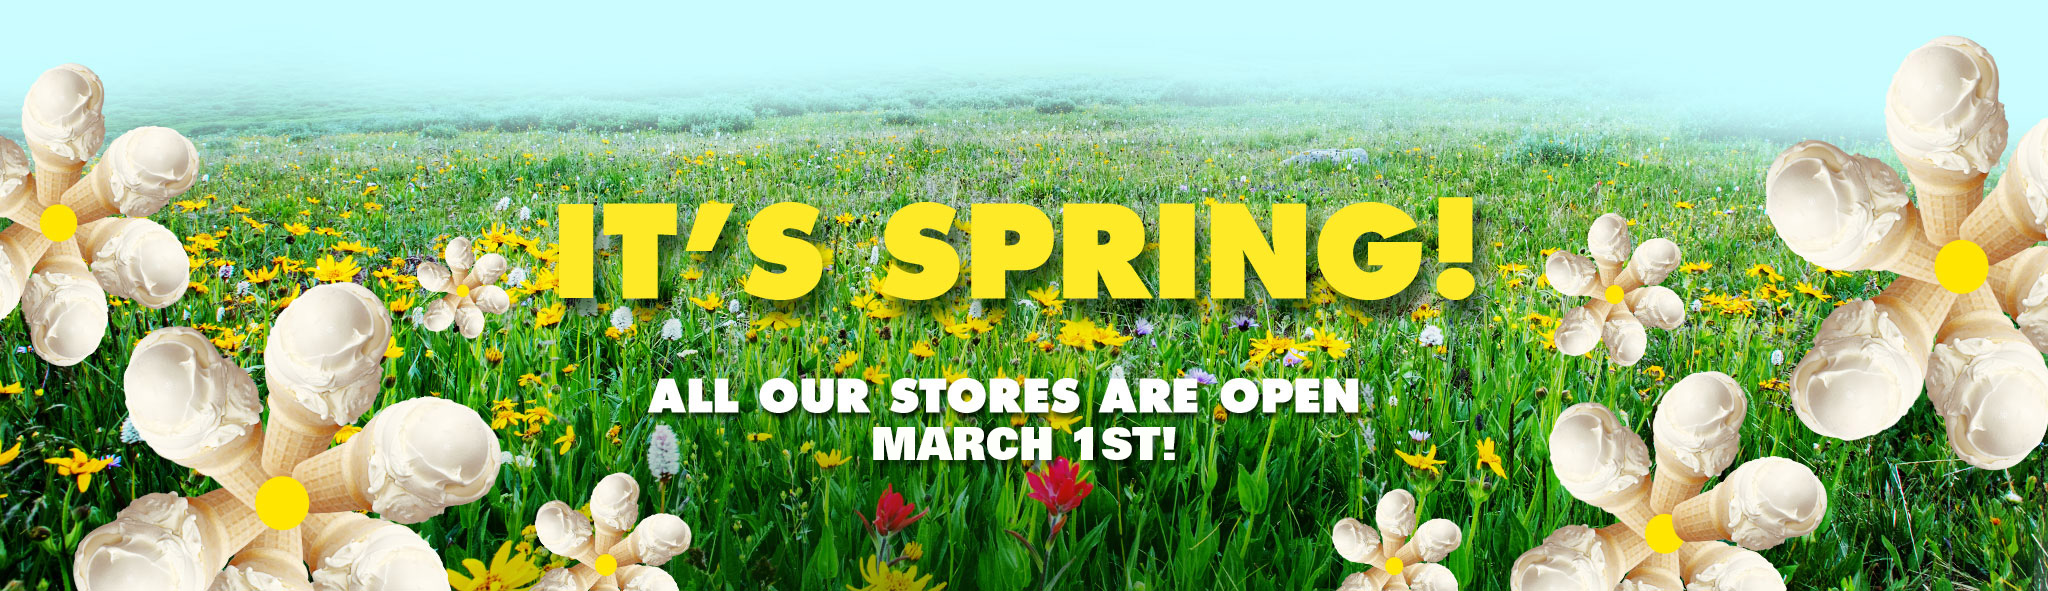 Stores Open March 1st